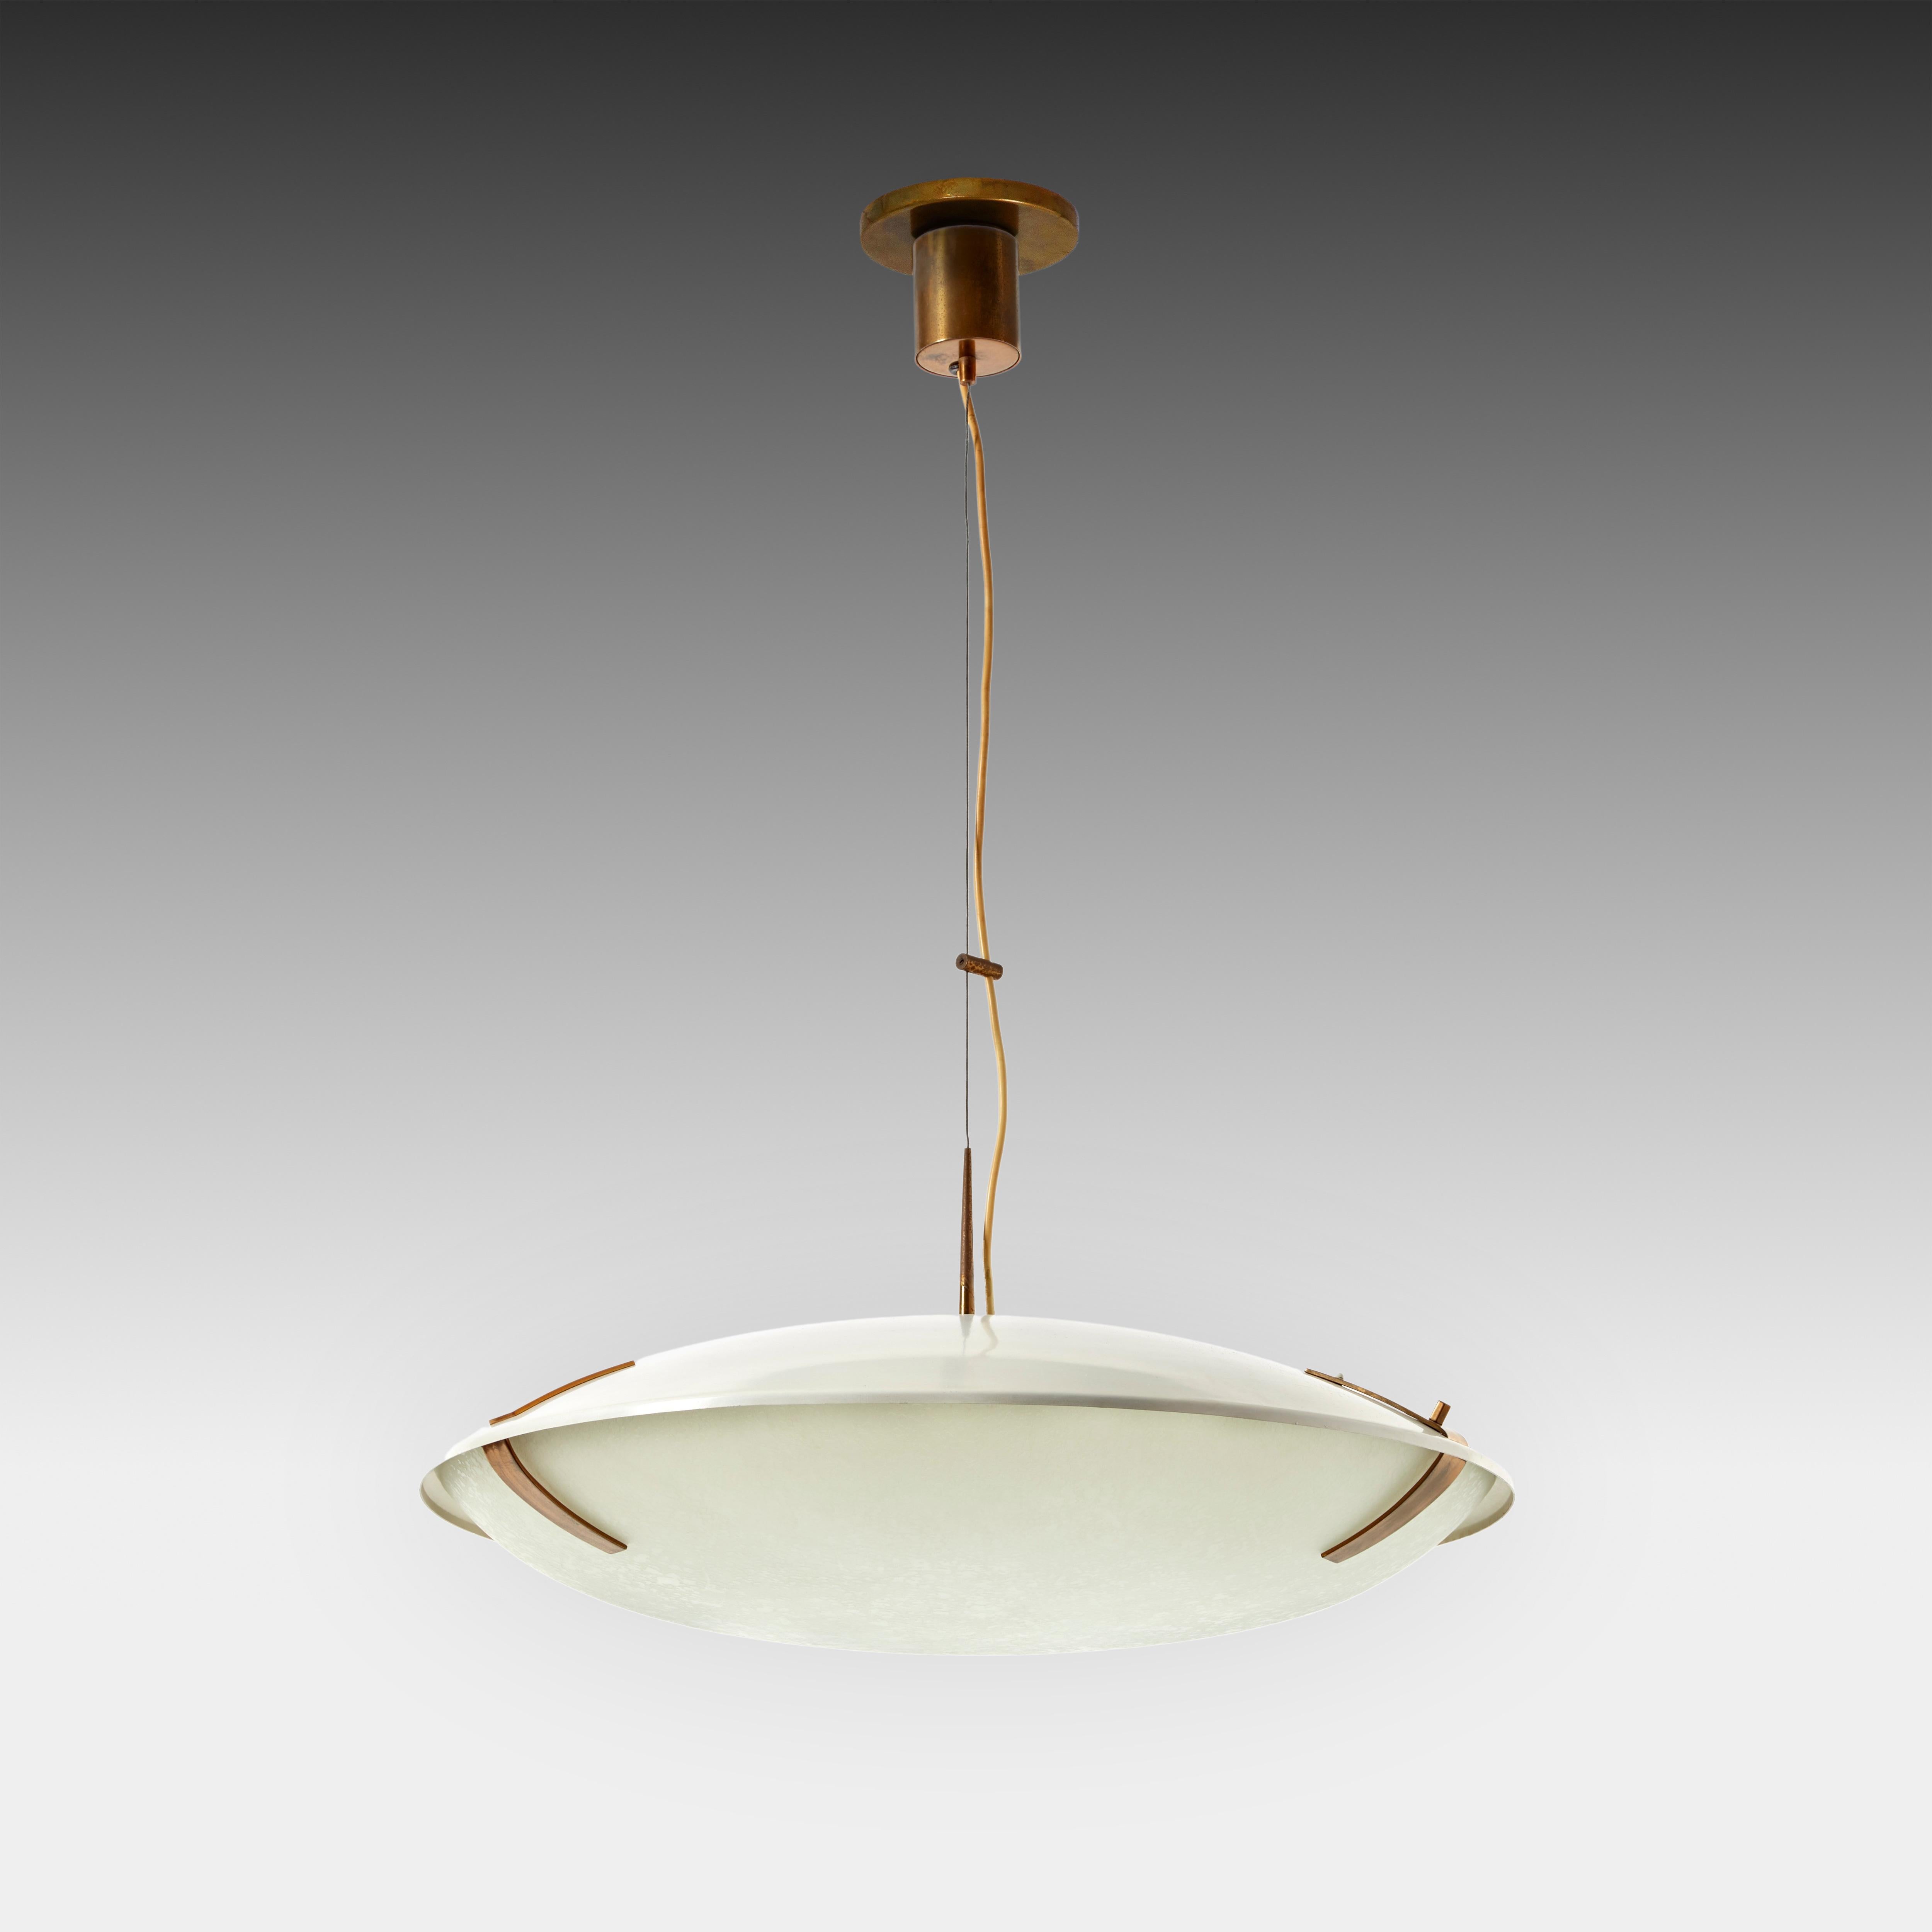 Stilnovo adjustable pair of adjustable pendants or suspension lights model 1140 each with white enameled aluminum shade suspending textured glass dome shade with brass fittings and suspended from its original brass canopy with custom ceiling plate.